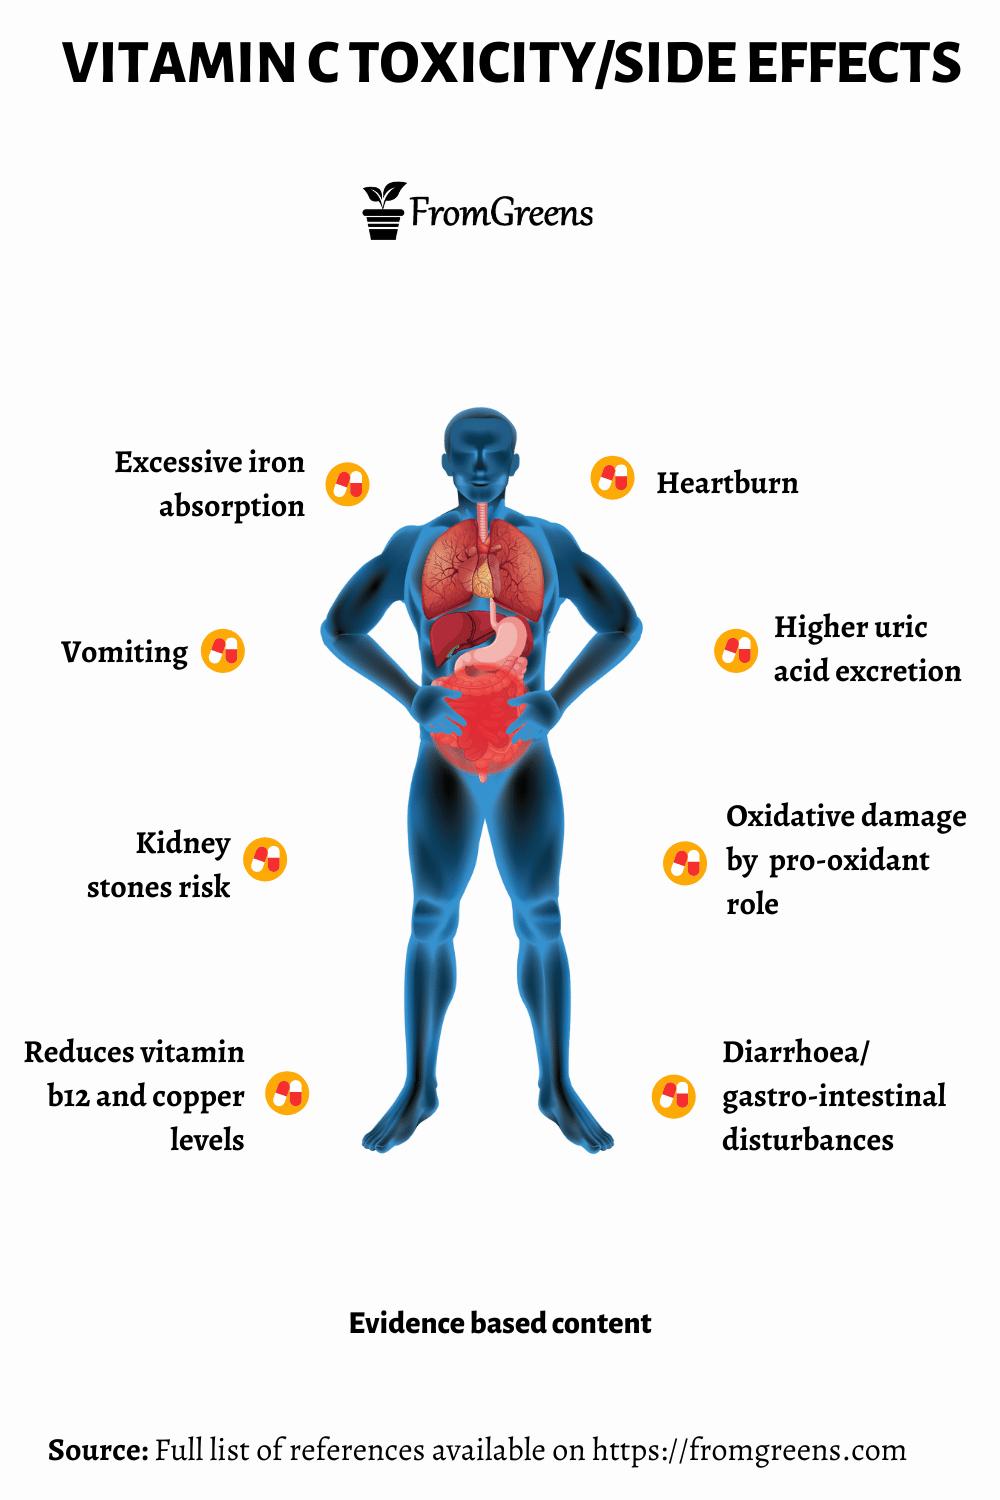 A diagram showing the side effects of Vitamin C toxicity.